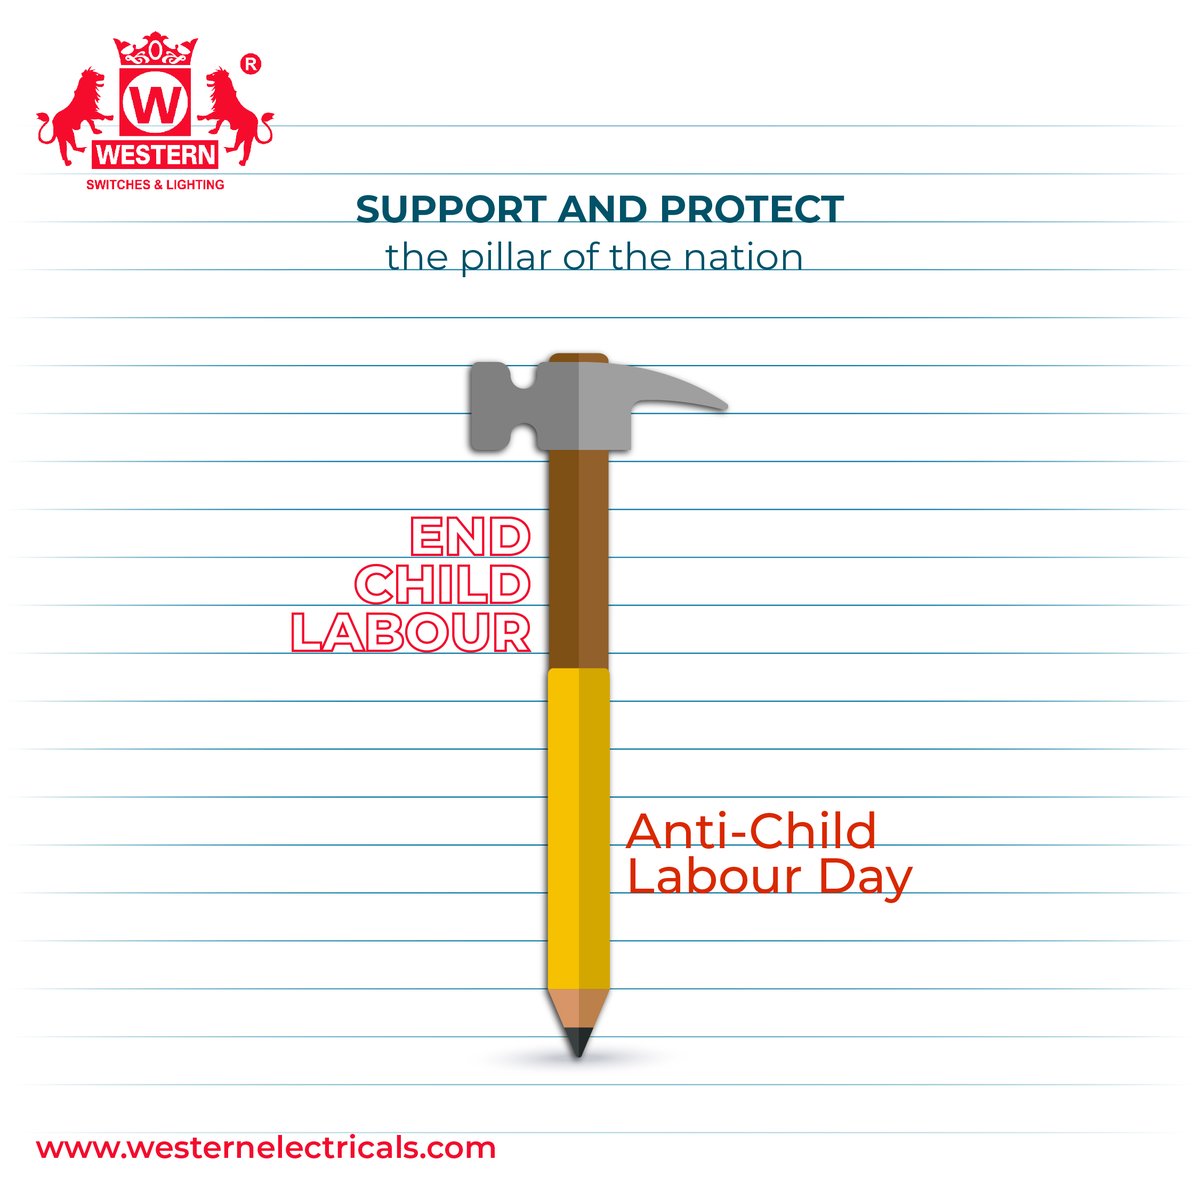 Children are the future of our Nation. Let’s #dedicate #ourselves #today & #everyday to #protect our #children from the evil of #childlabor 

#WesternElectricals #antichildlaborday #ChaildLaborday #GiveEducationtoChildrens #StopChildLabor #EndChildLabor2021